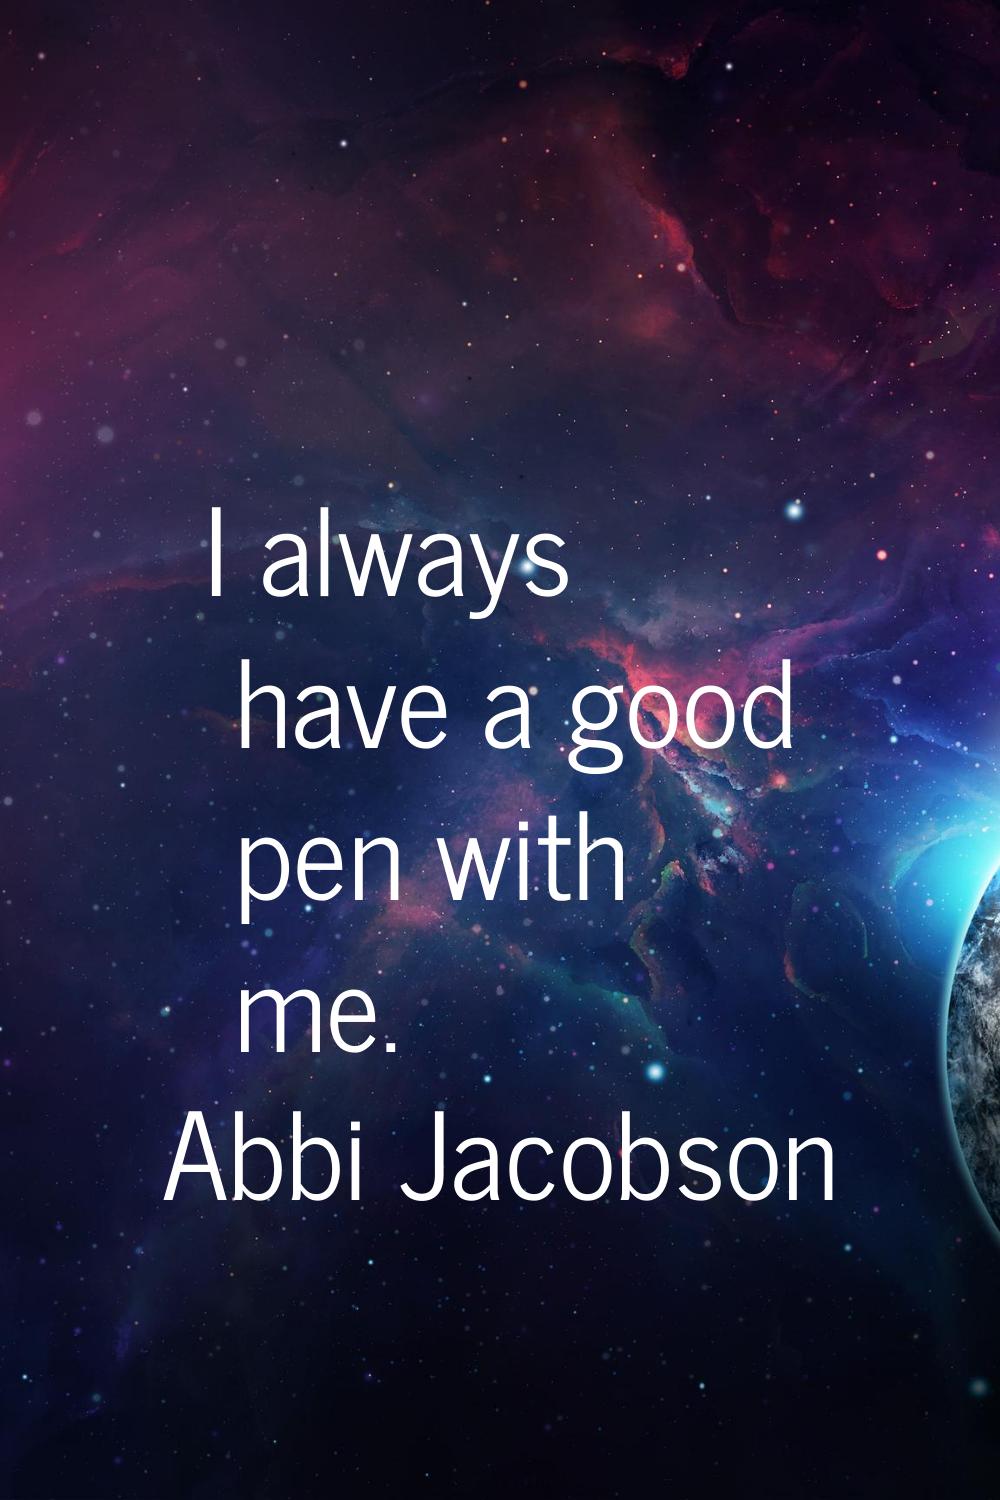 I always have a good pen with me.